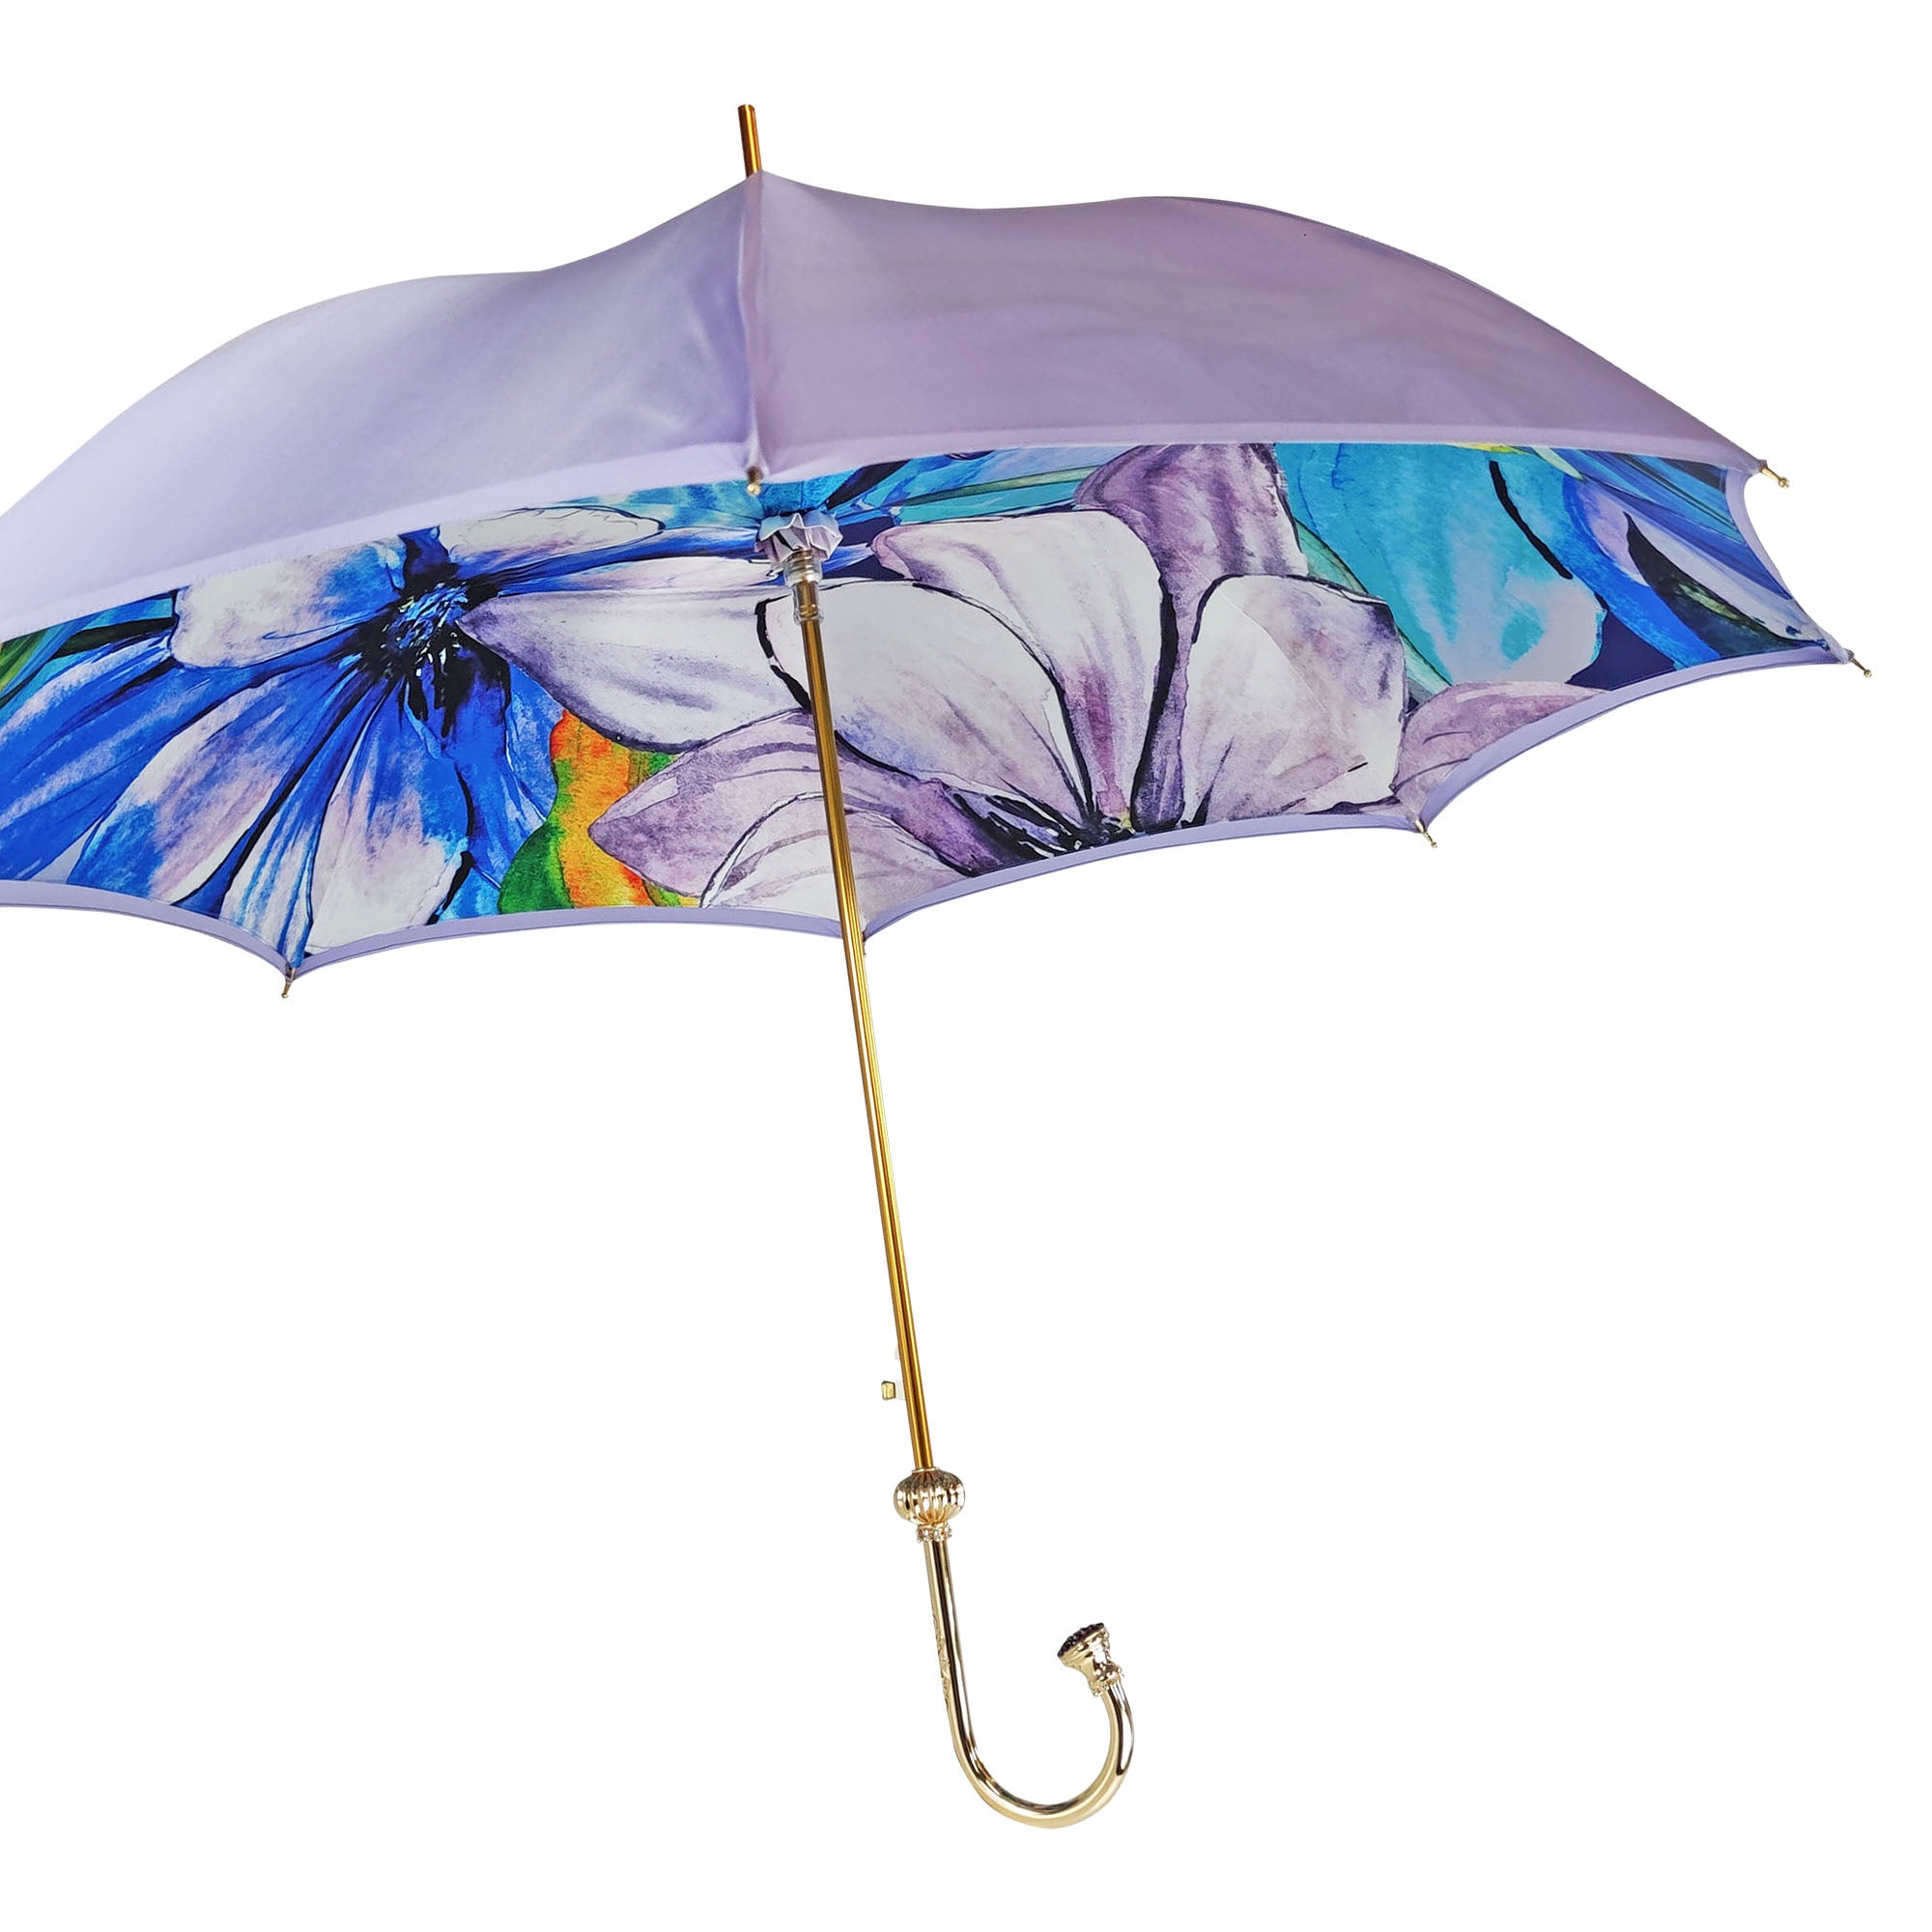 Flowered umbrella in shades of lilac